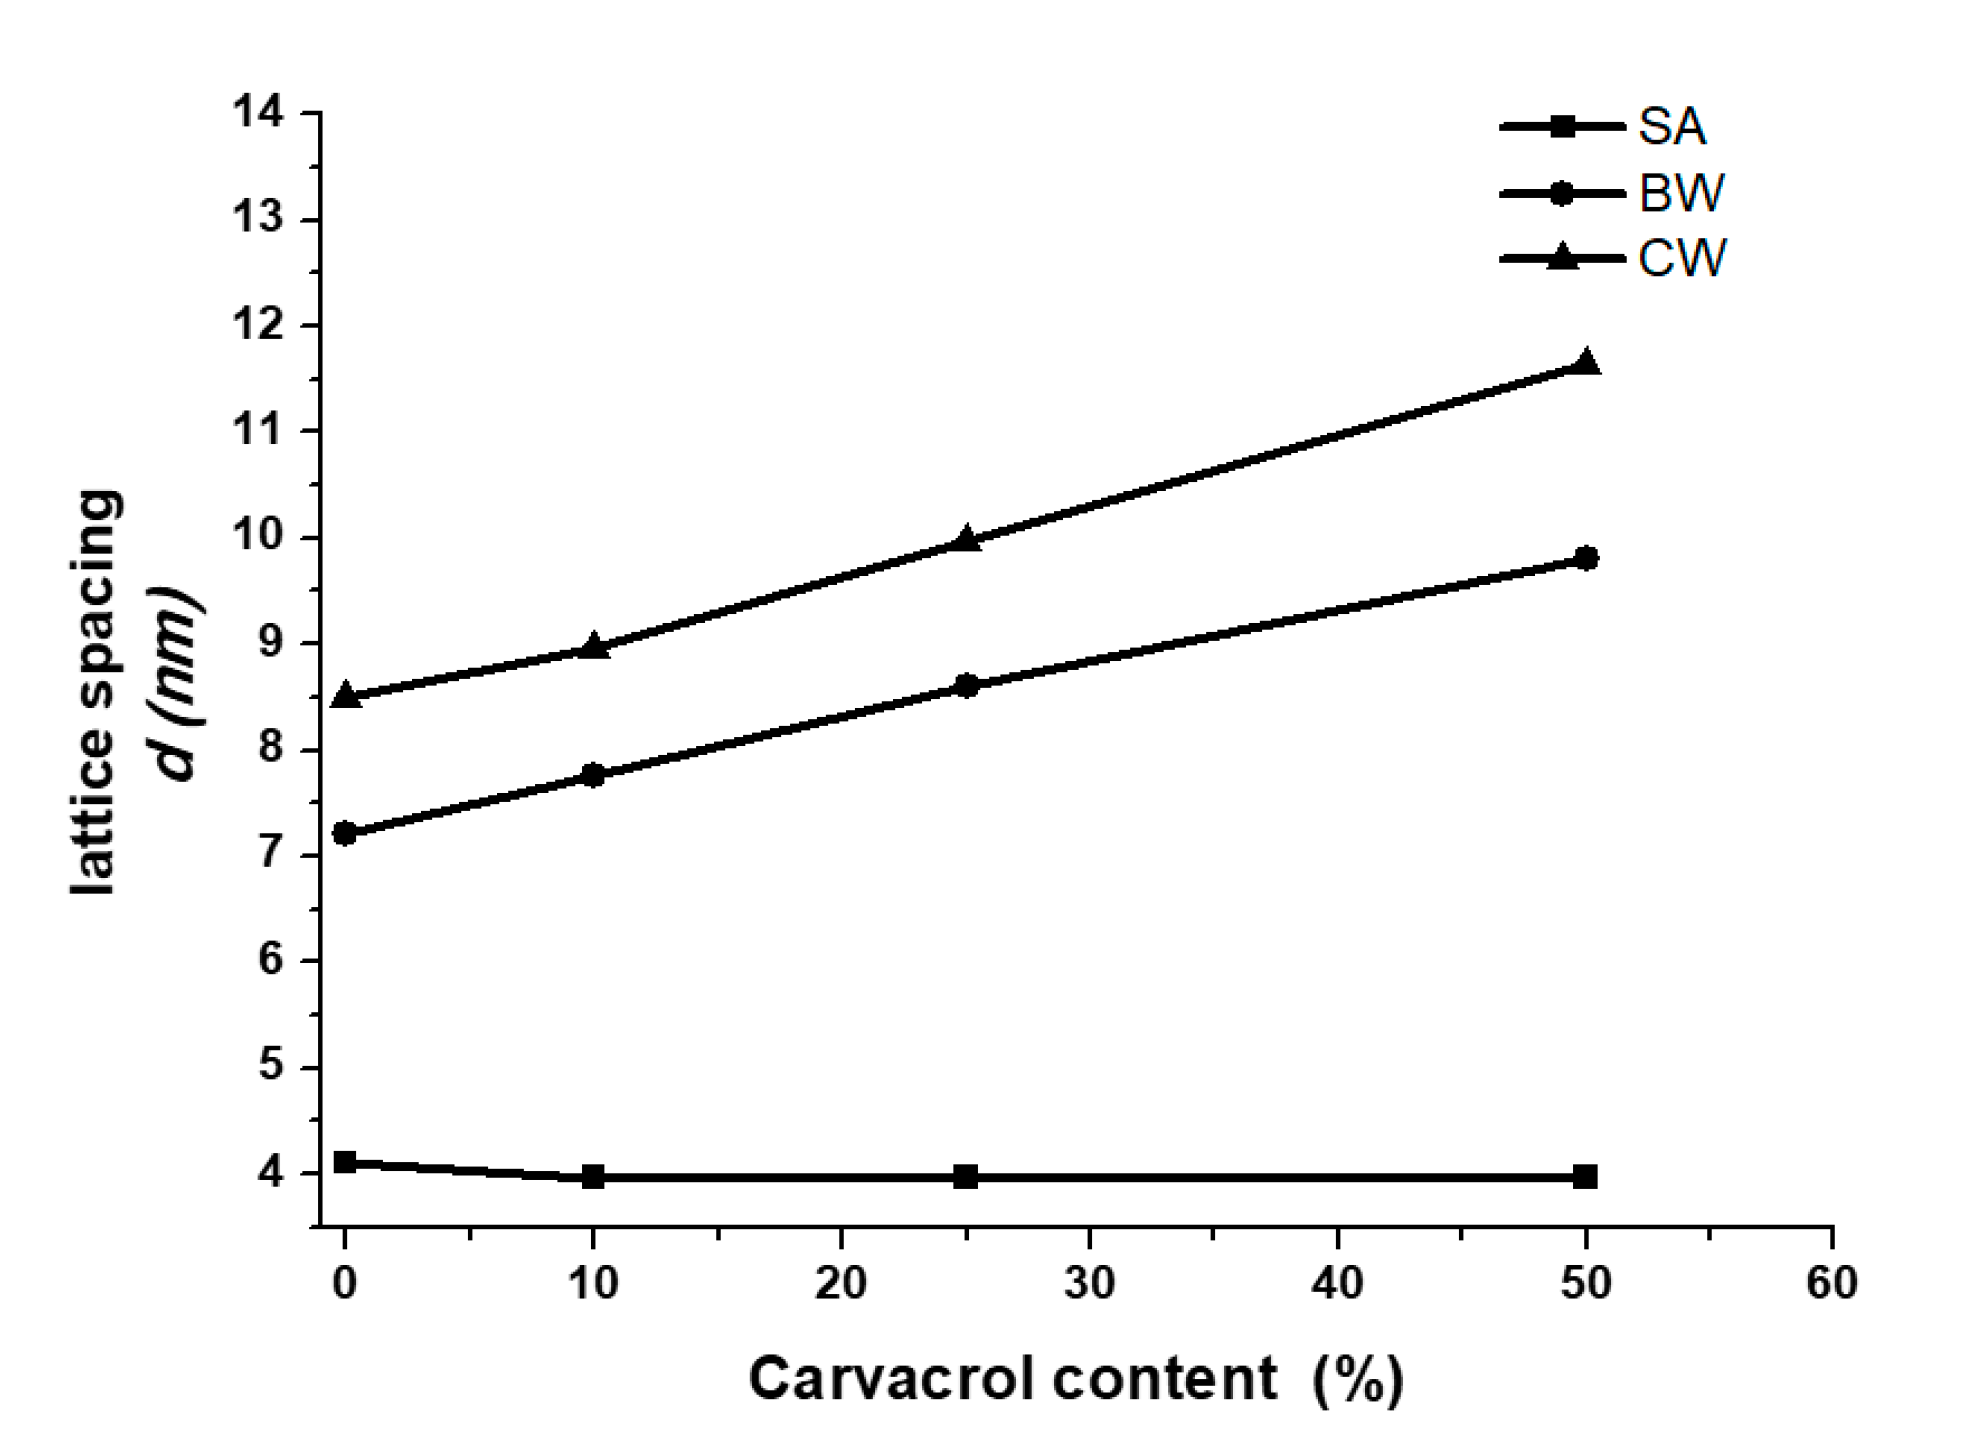 Applied Sciences Free Full Text Stearic Acid Beeswax And Carnauba Wax As Green Raw Materials For The Loading Of Carvacrol Into Nanostructured Lipid Carriers Html